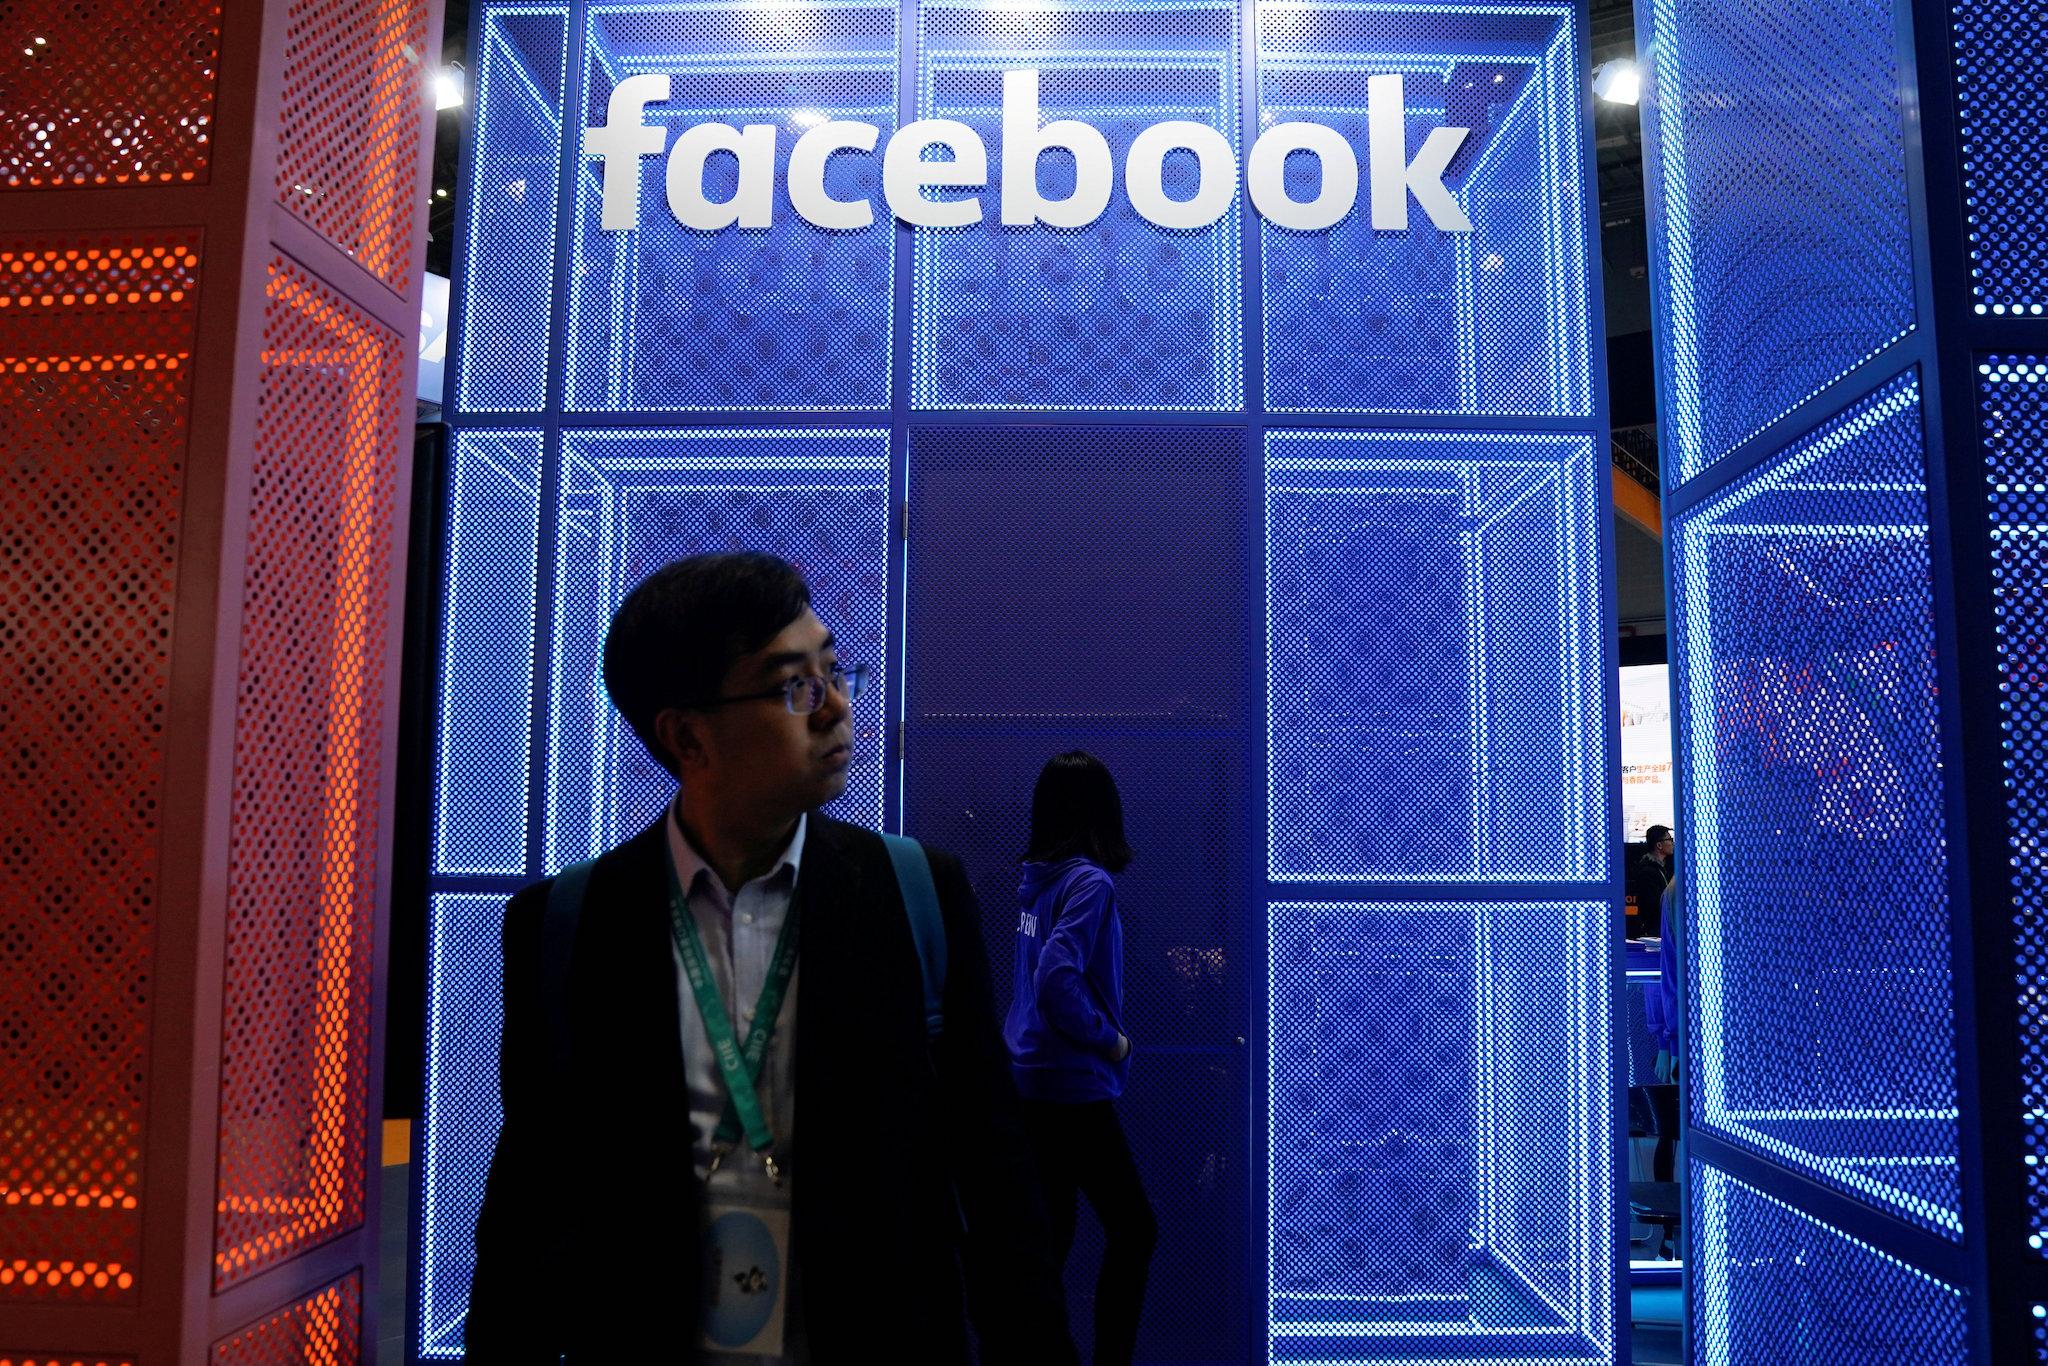 A Facebook sign is seen during the China International Import Expo (CIIE), at the National Exhibition and Convention Center in Shanghai